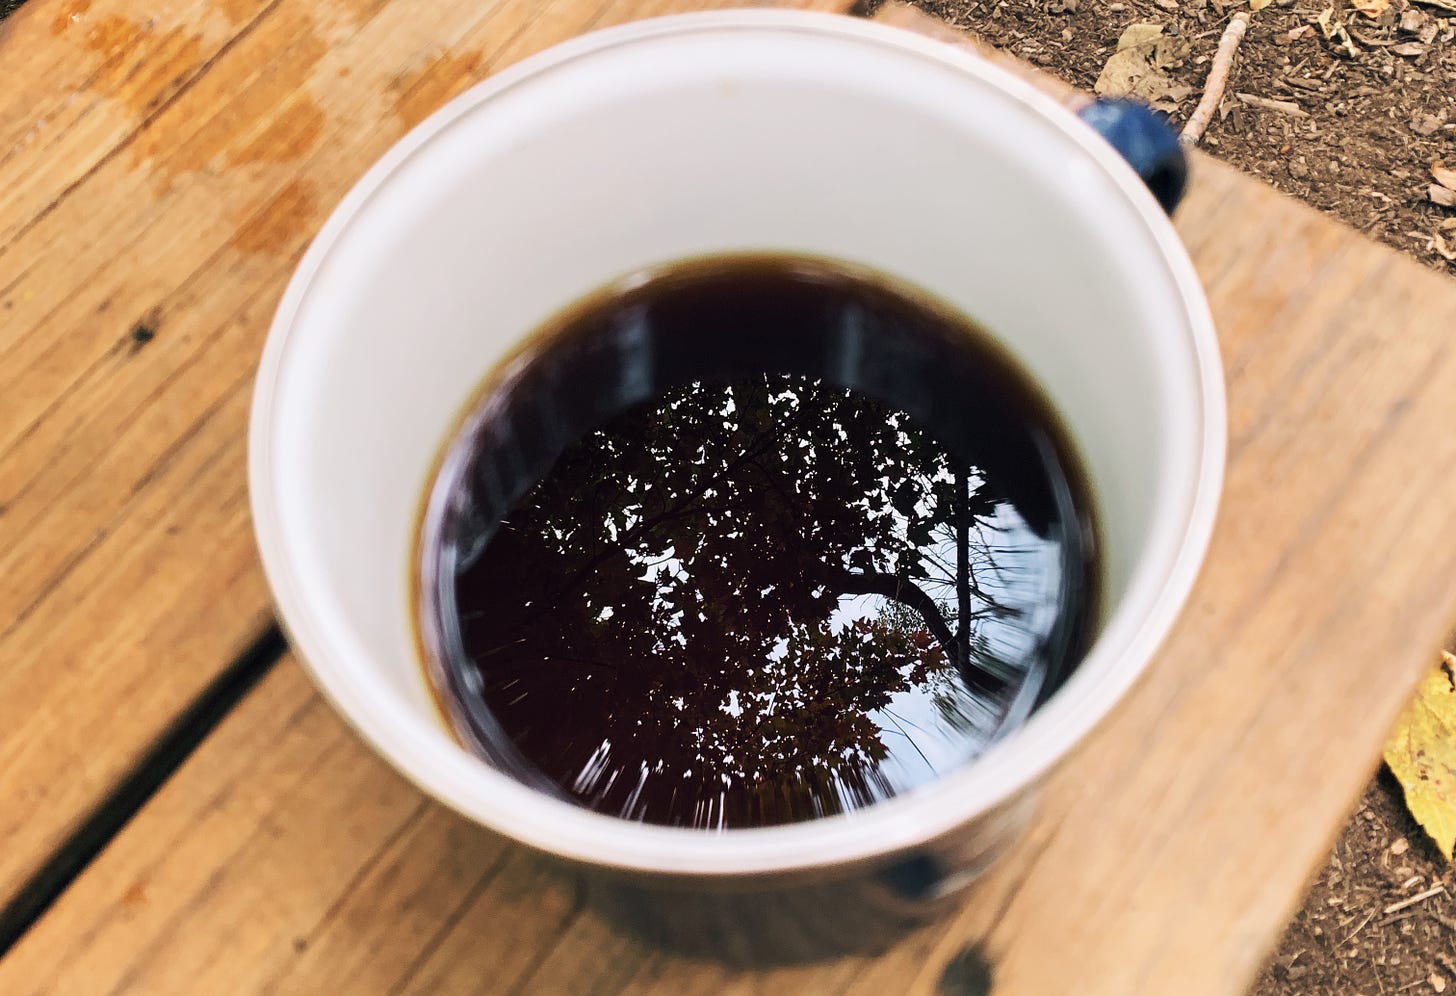 Cup of warm coffee with a reflection of trees inside the coffee cup.